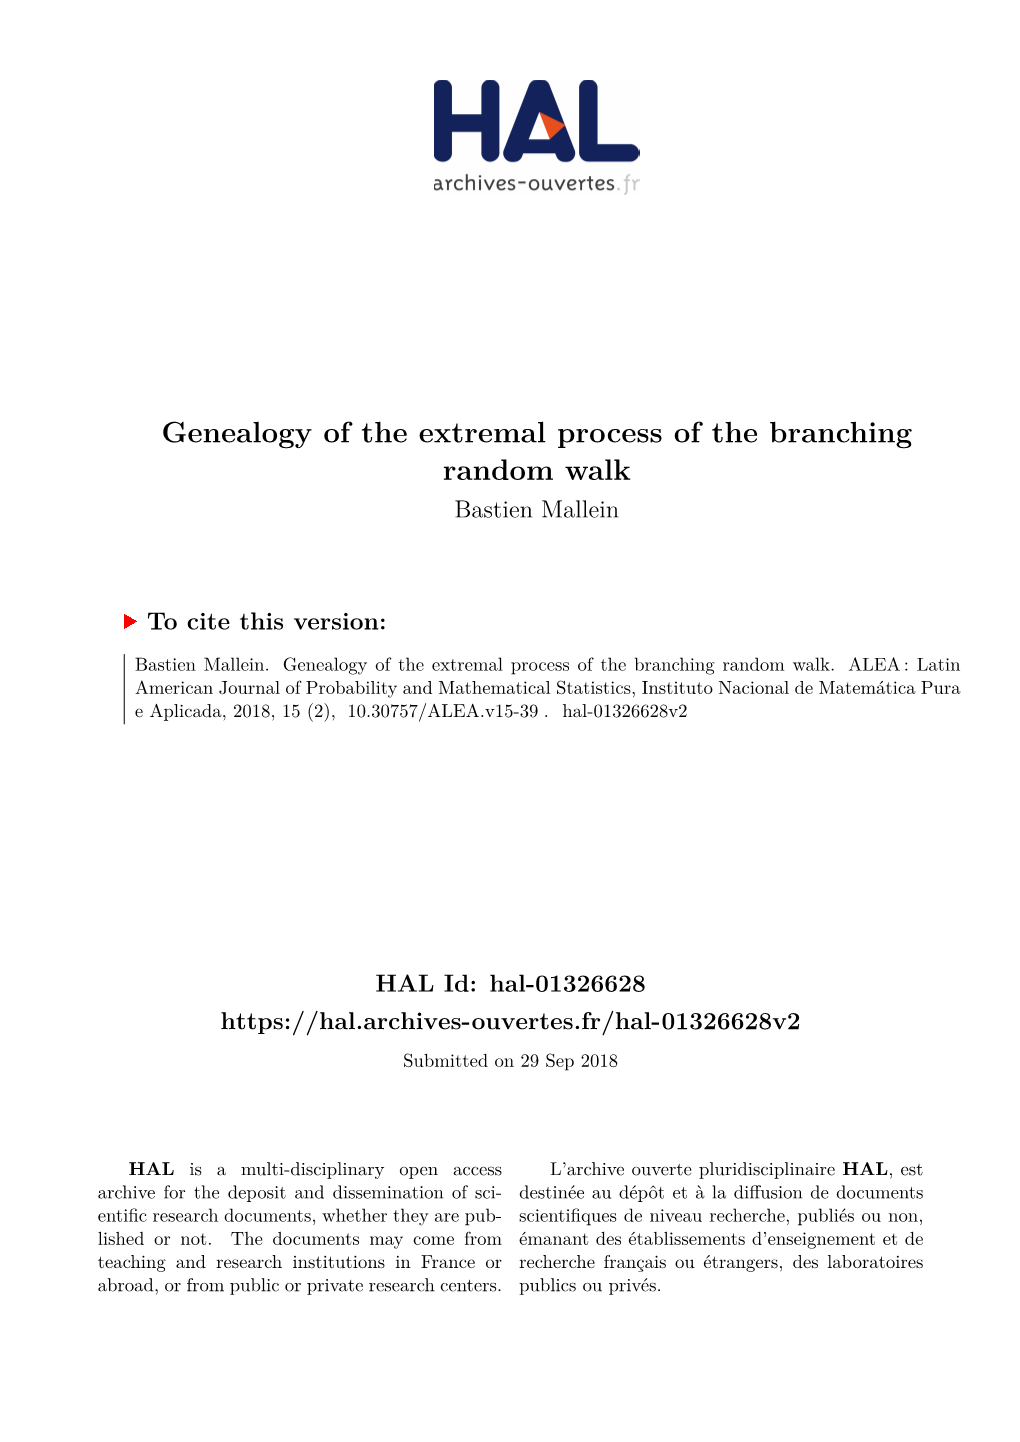 Genealogy of the Extremal Process of the Branching Random Walk Bastien Mallein